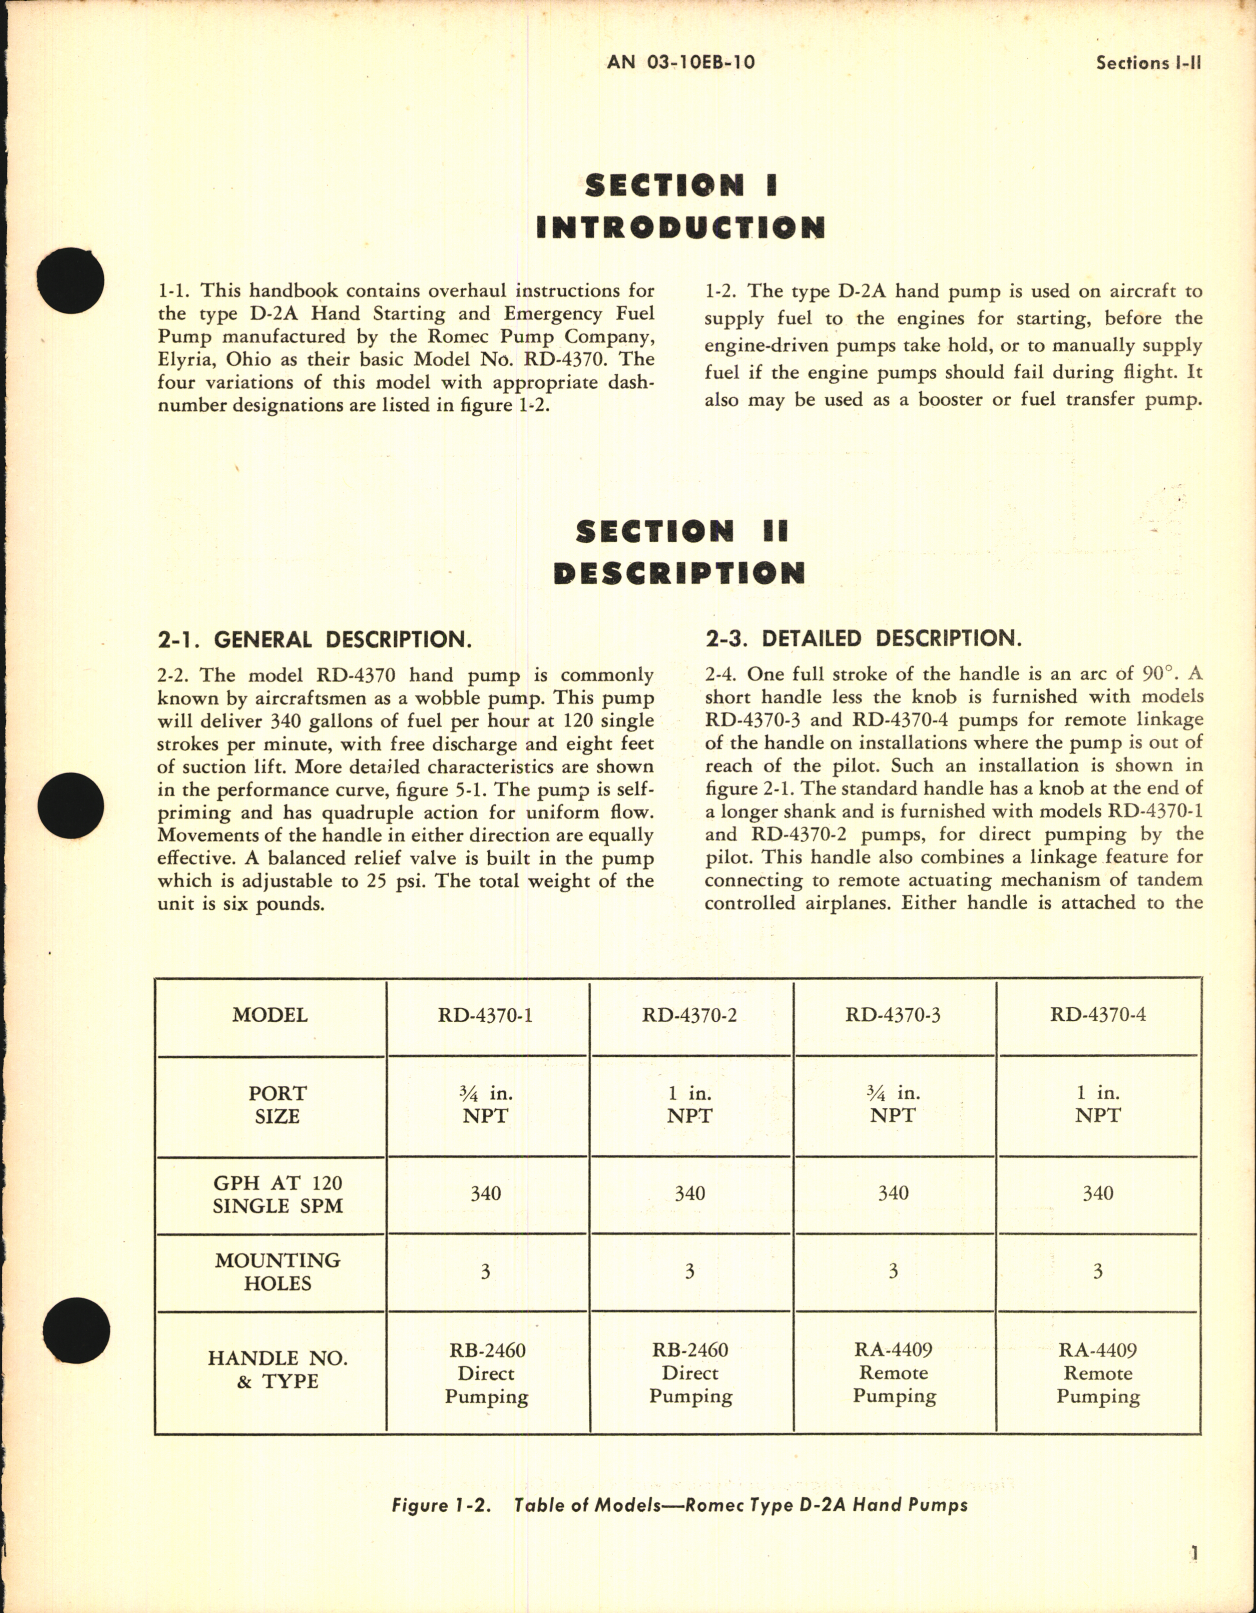 Sample page 5 from AirCorps Library document: Overhaul Instructions for Type D-2A Hand Fuel Pumps Model RD-4370 Series